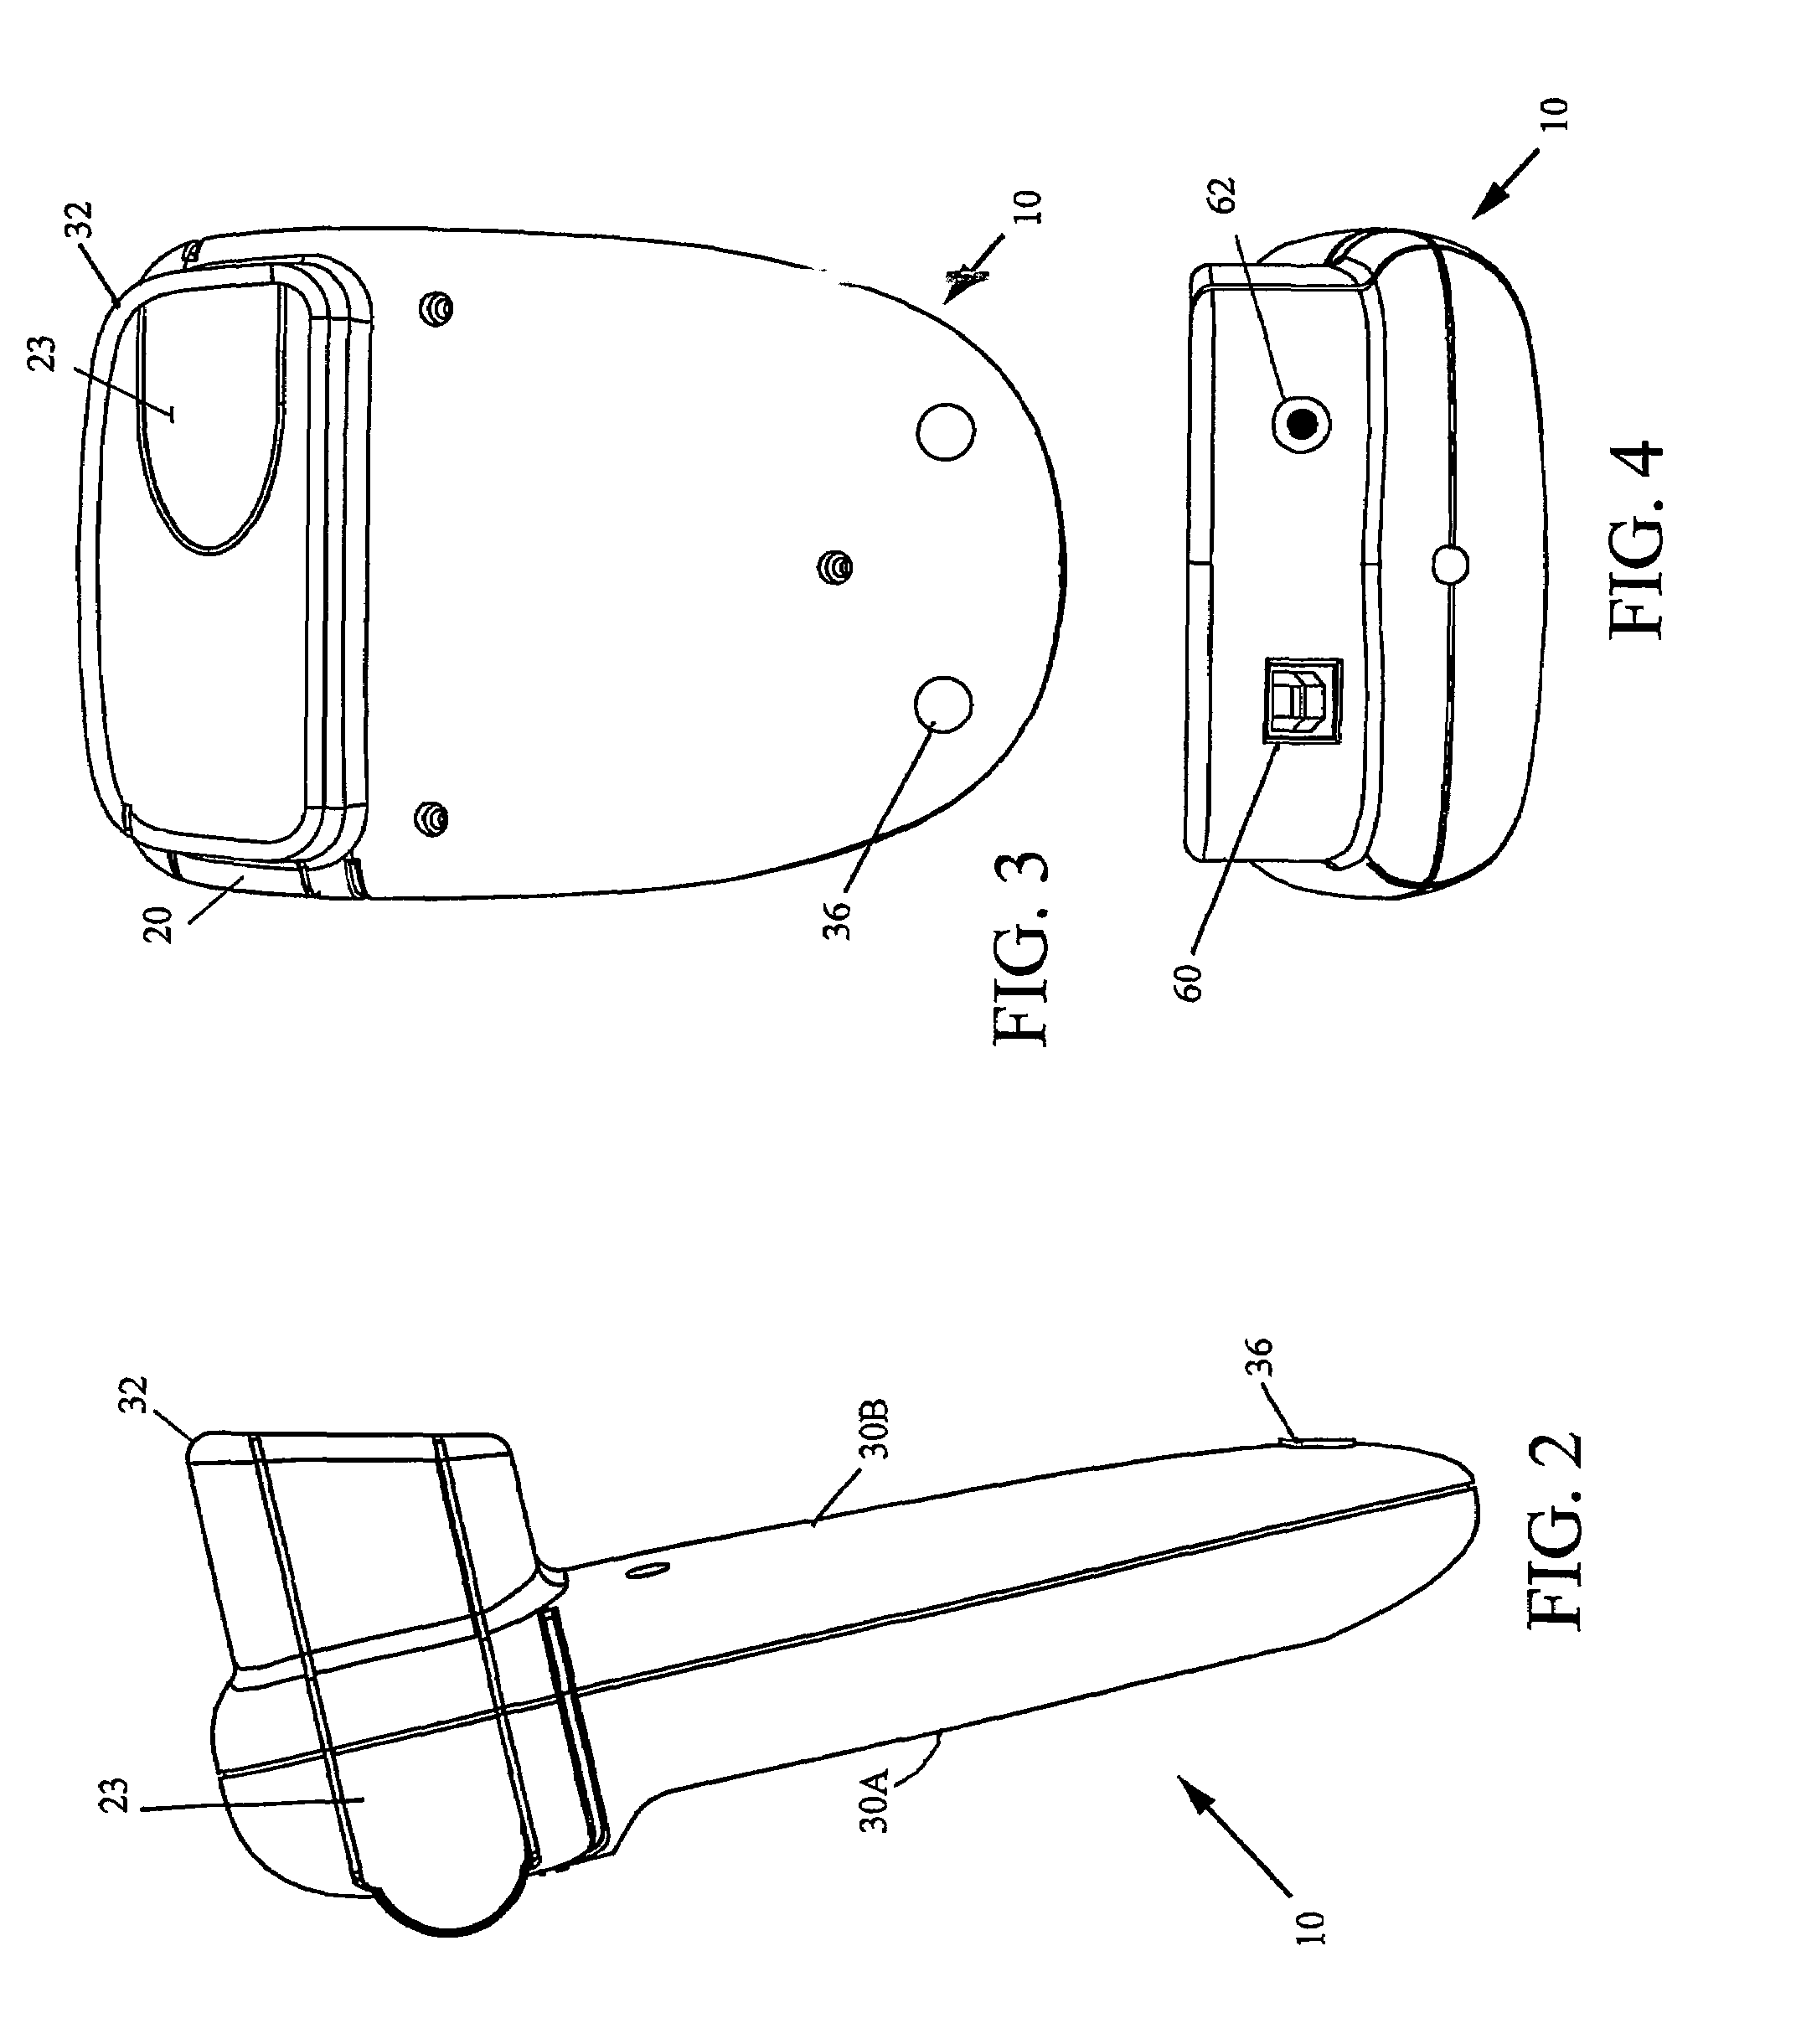 Method and apparatus for ultrasonic determination of hematocrit and hemoglobin concentrations